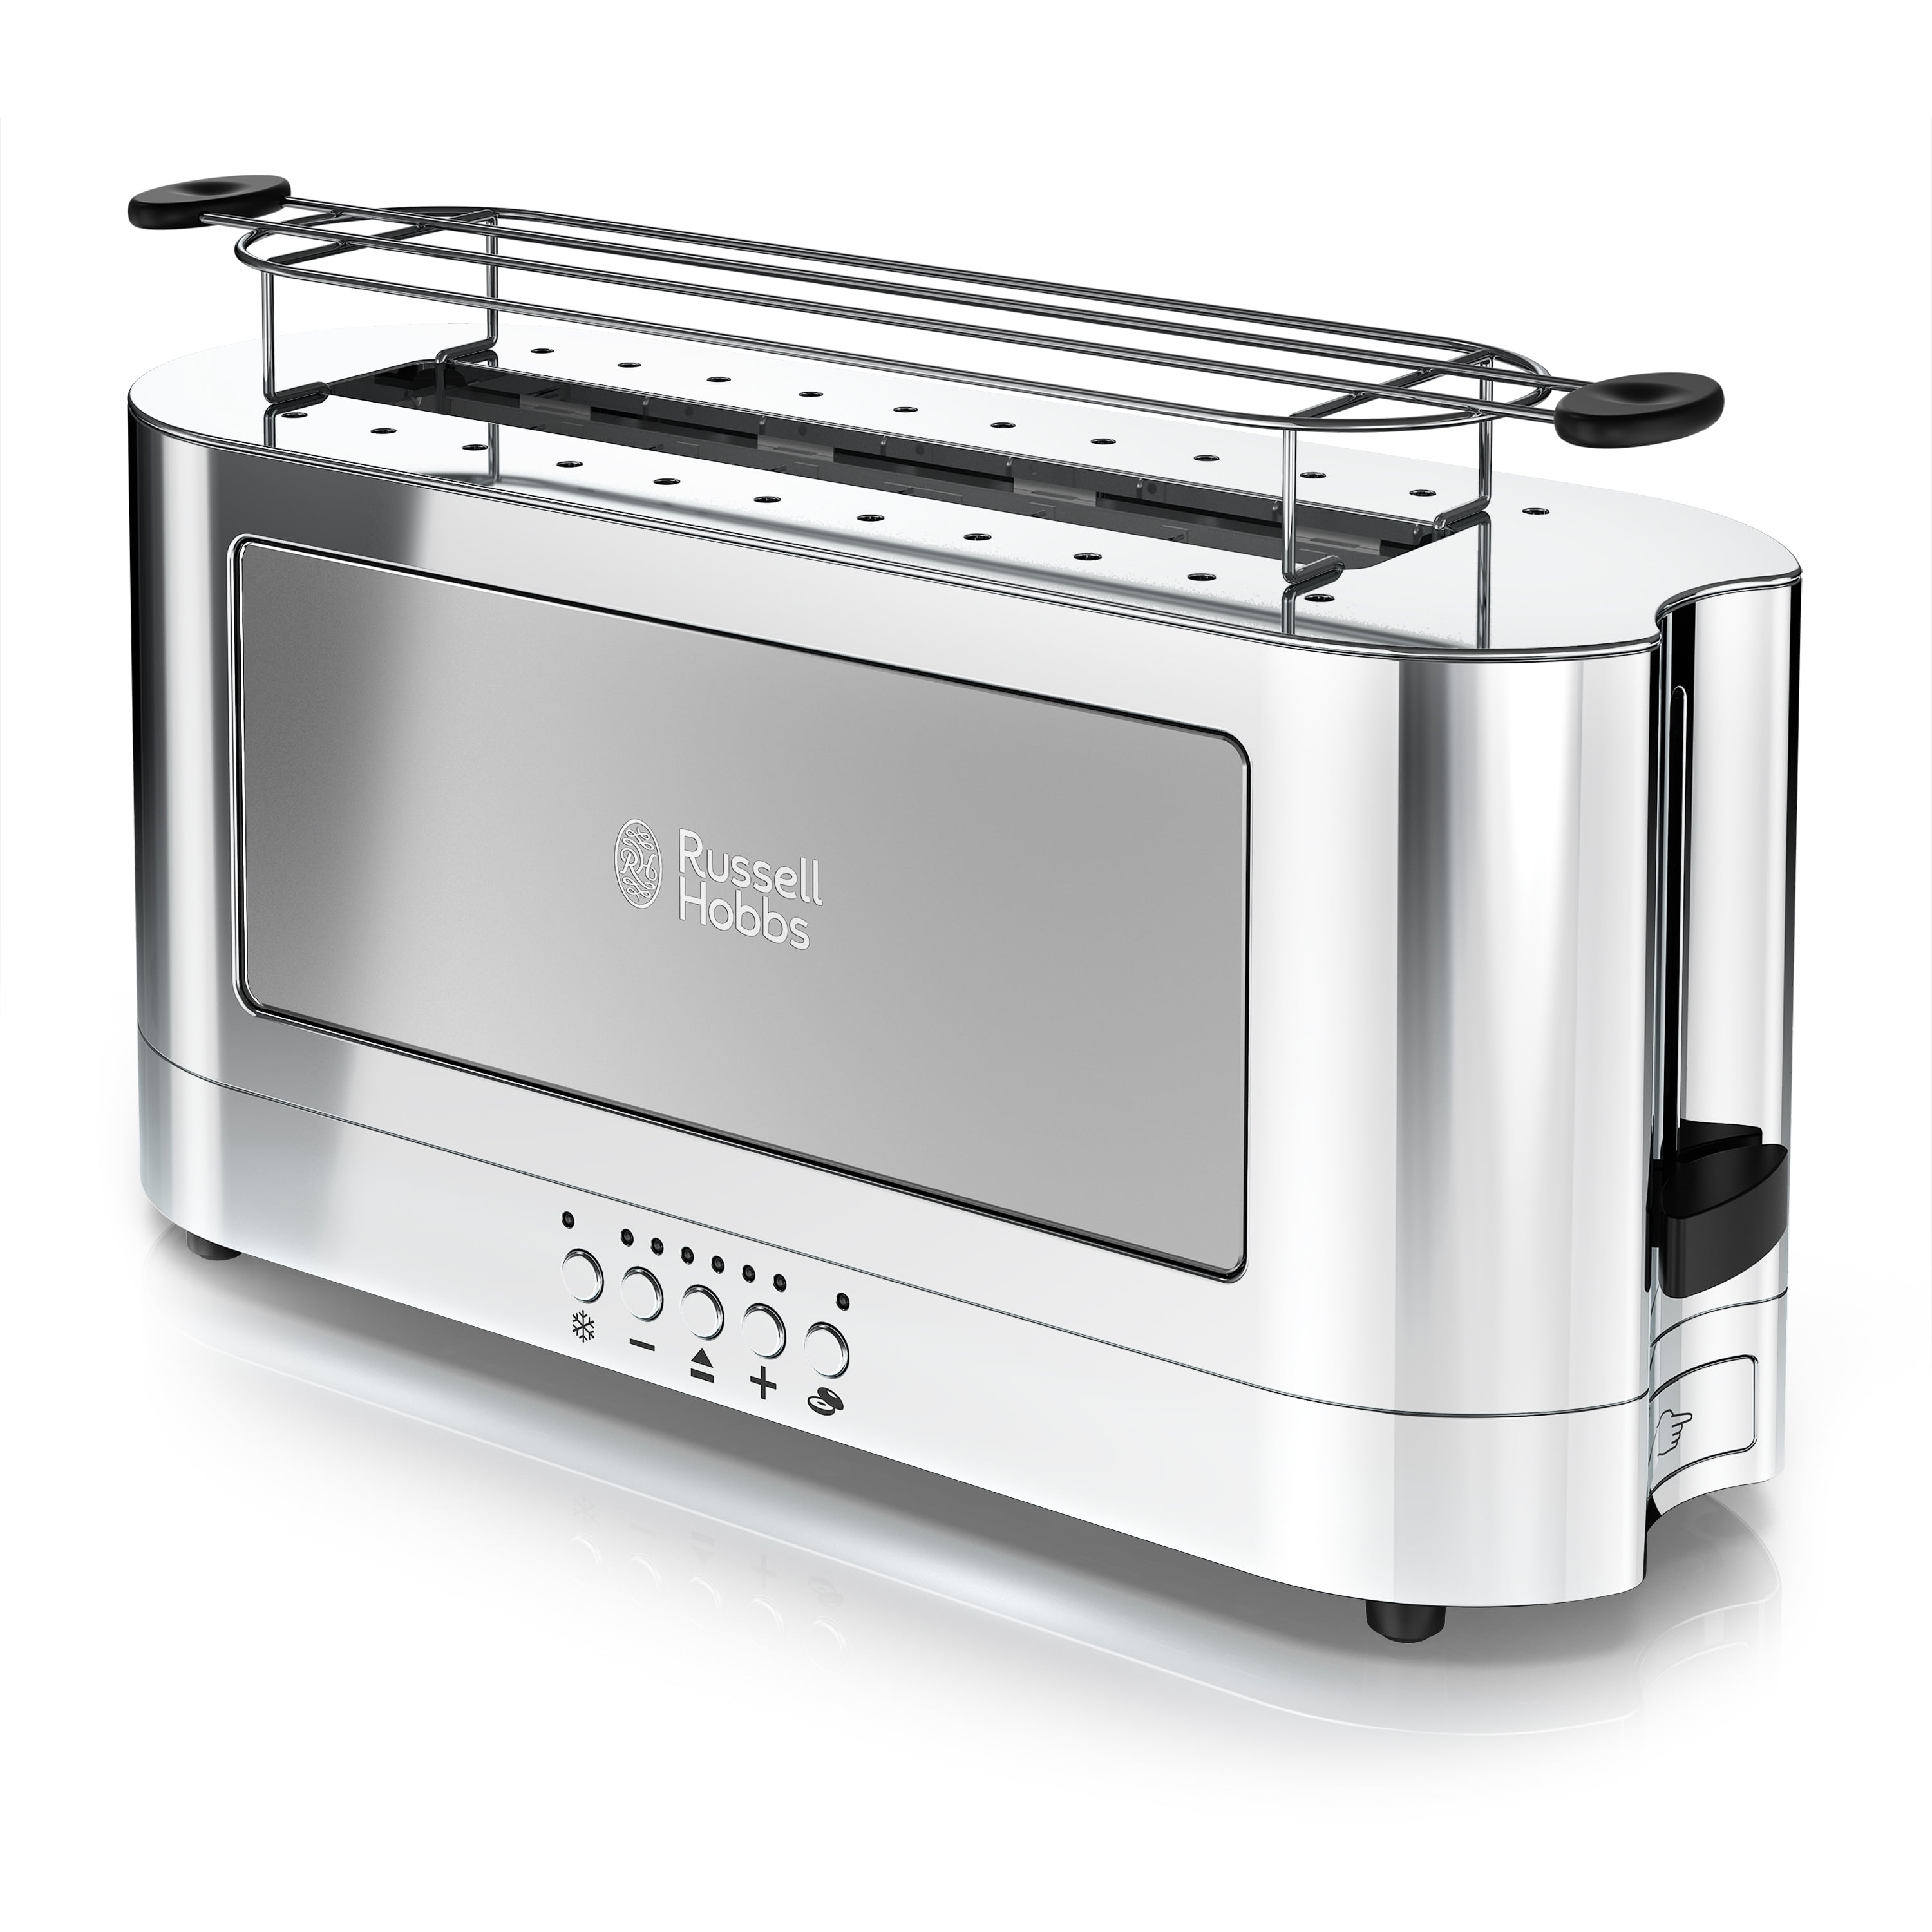 Glass Accent Toaster, Silver, TRL9300GYR Russell 2-Slice Long Hobbs